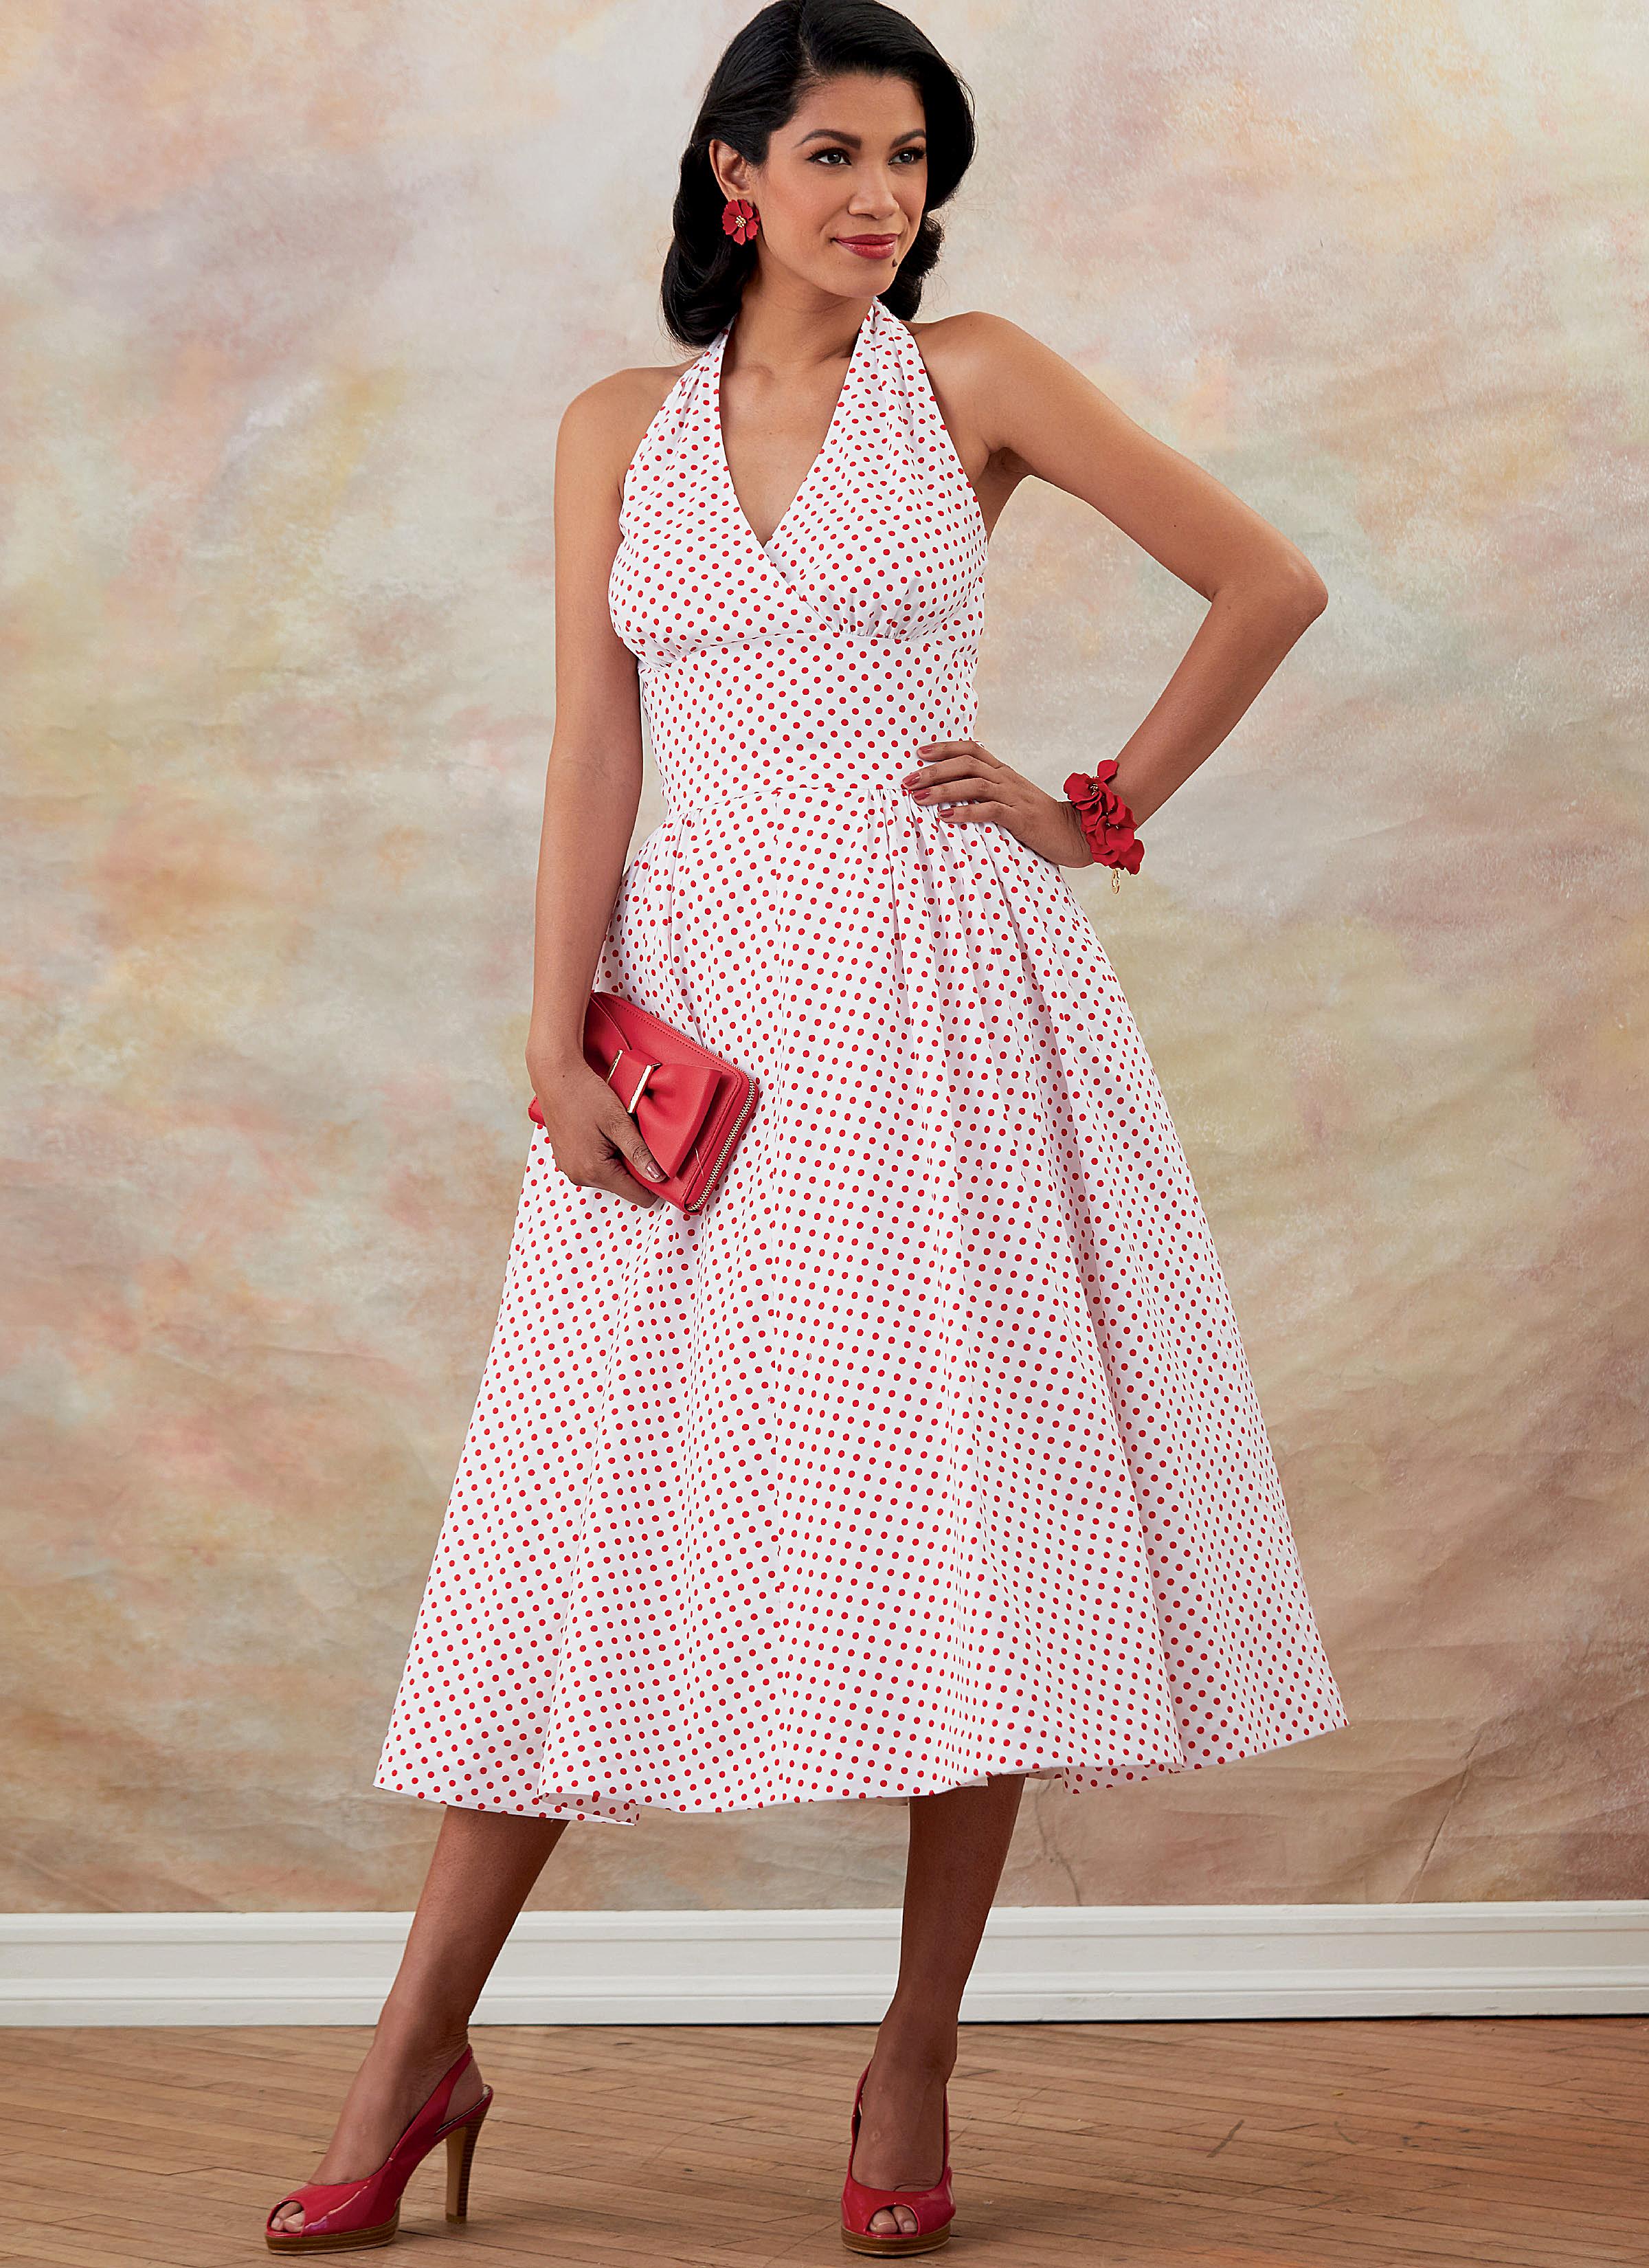 Butterick B6682 Misses' Dress and Jacket